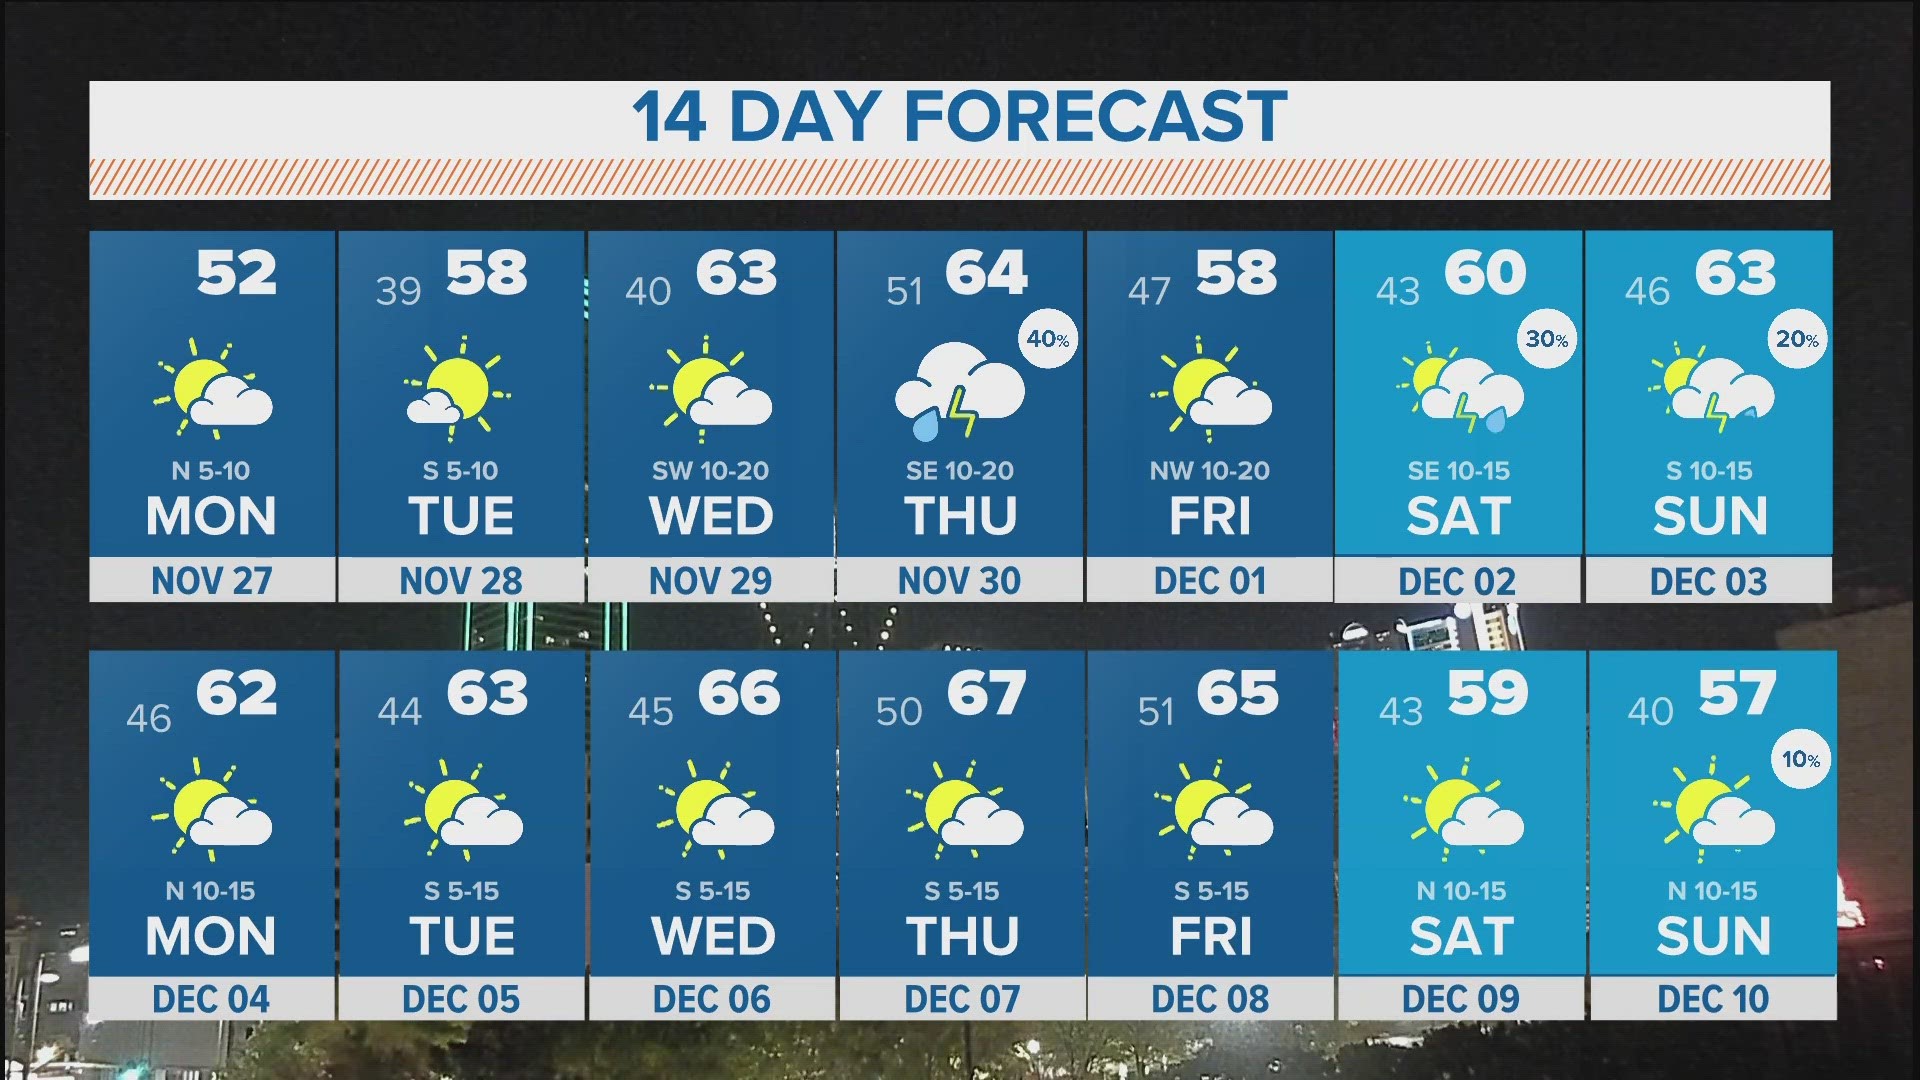 Temps slowly warm the rest of the week with afternoon highs back in the 60s by mid-week.